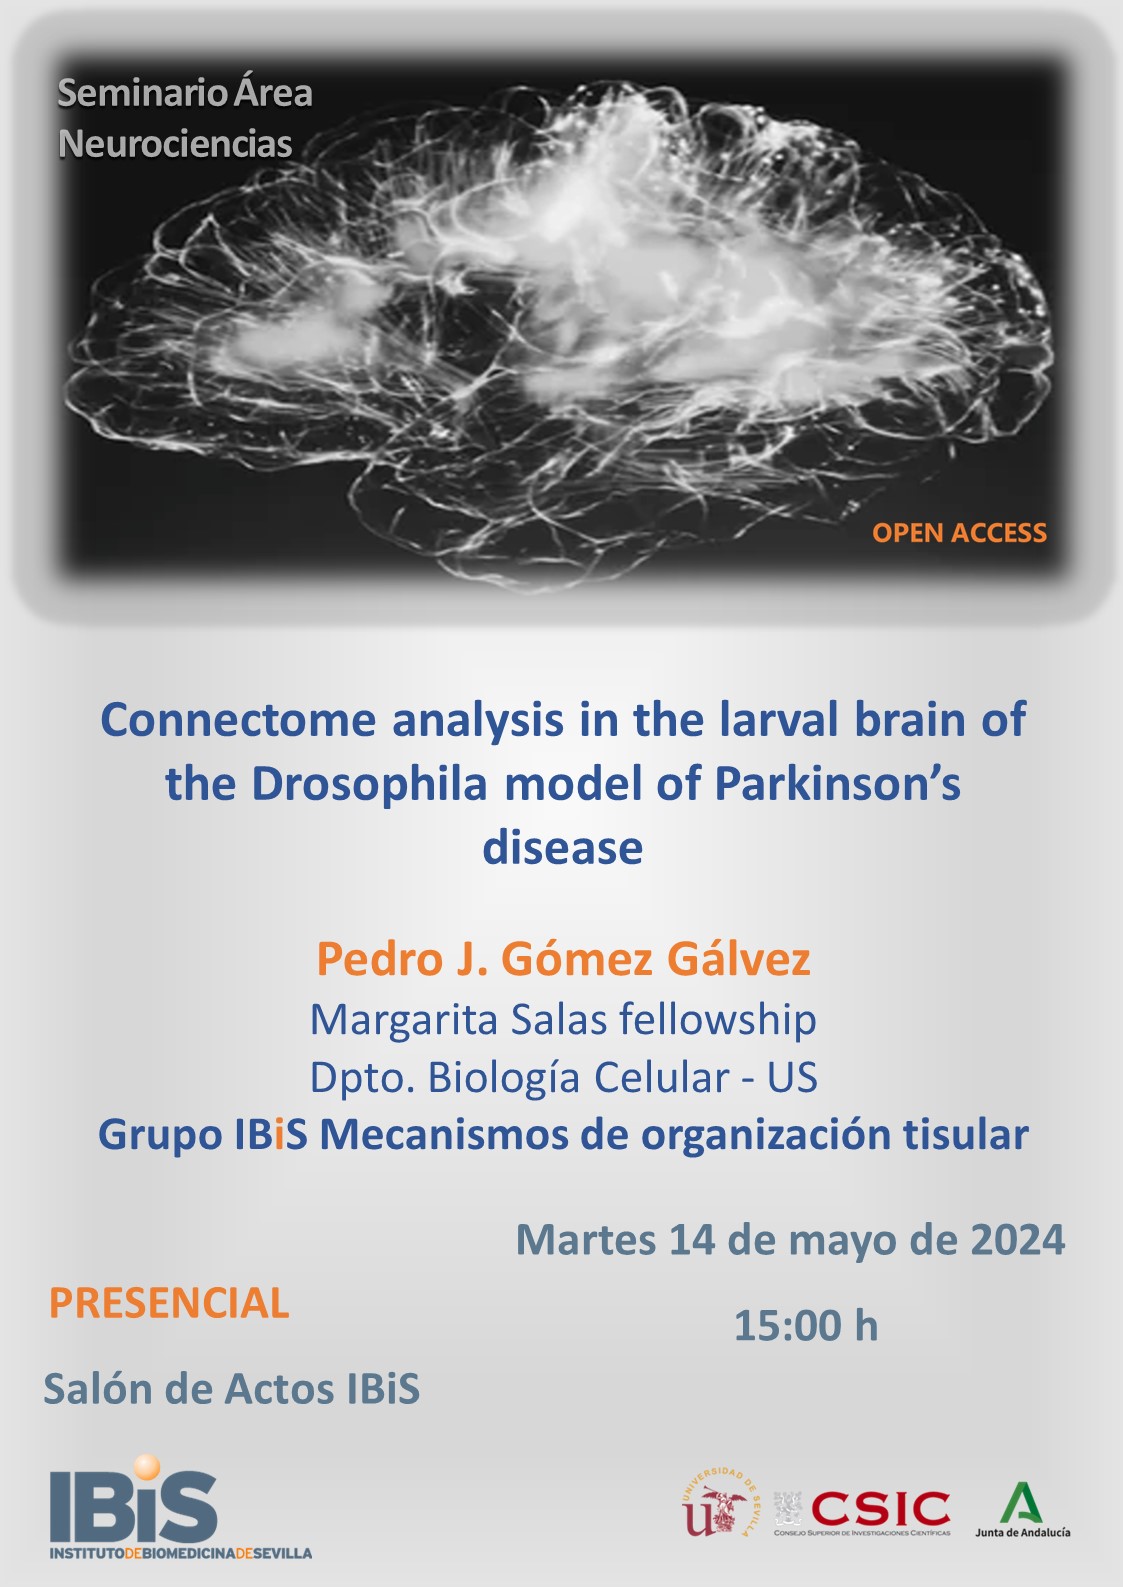 Poster: Connectome analysis in the larval brain of the Drosophila model of Parkinson’s disease